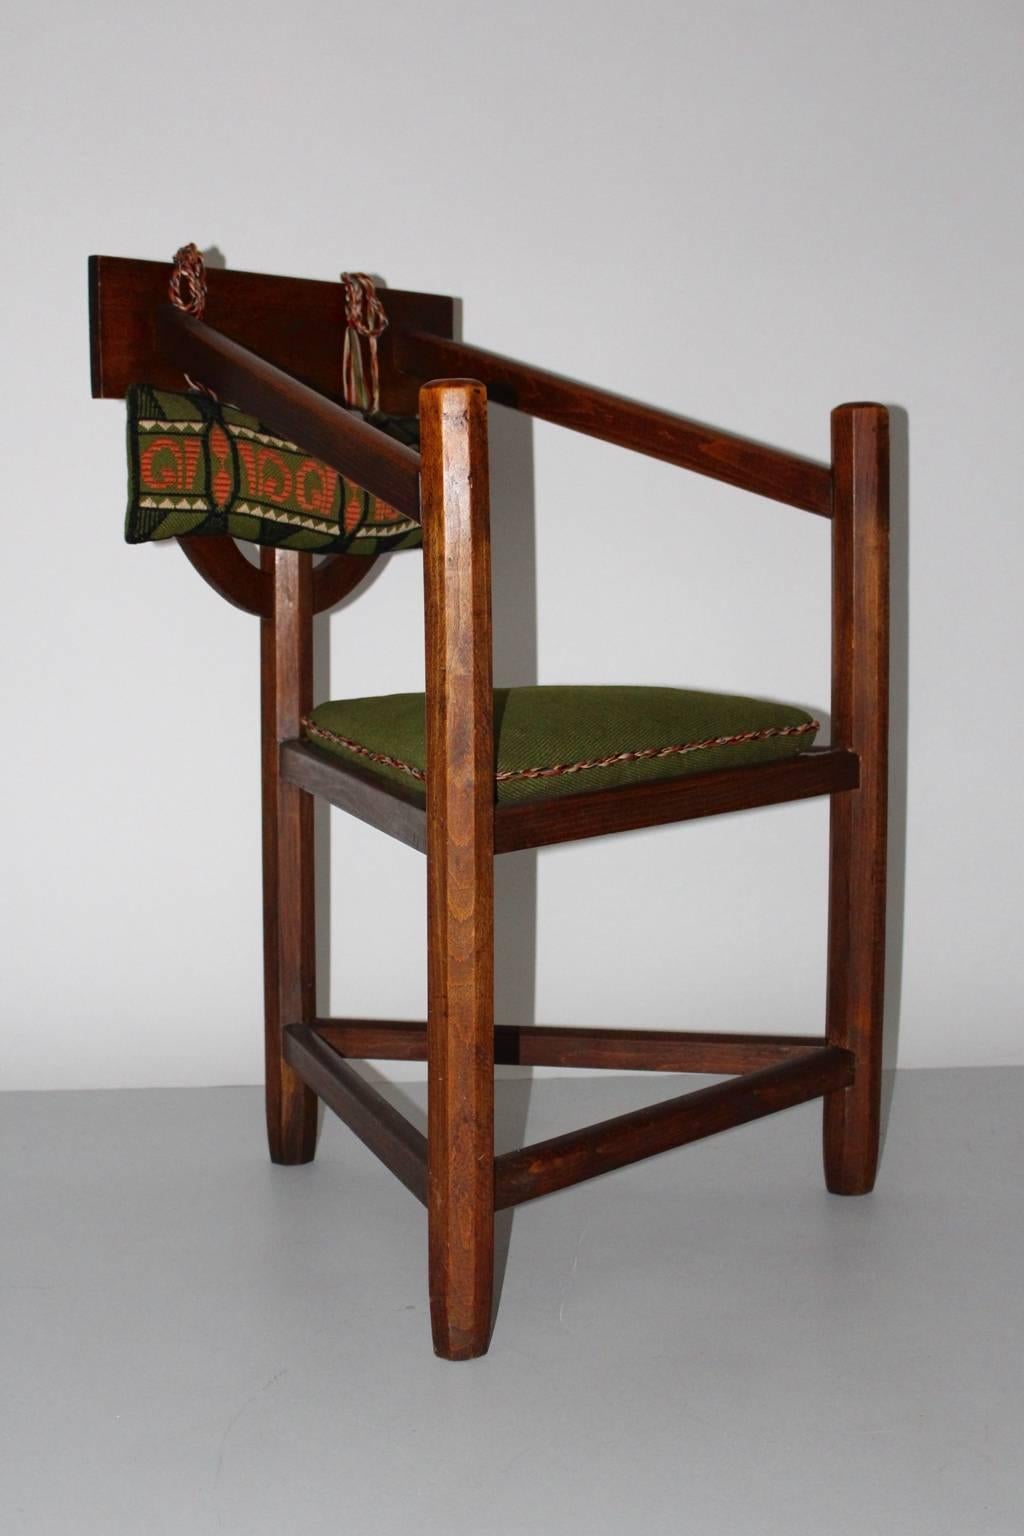 Art deco vintage rustic armchair from beech 1920s Sweden. 
A beautiful freestanding armchair with three legs and triangle like seat with loose green stitched fabric cushion. 
The rustic armchair features hand carved details at the back. Rustic